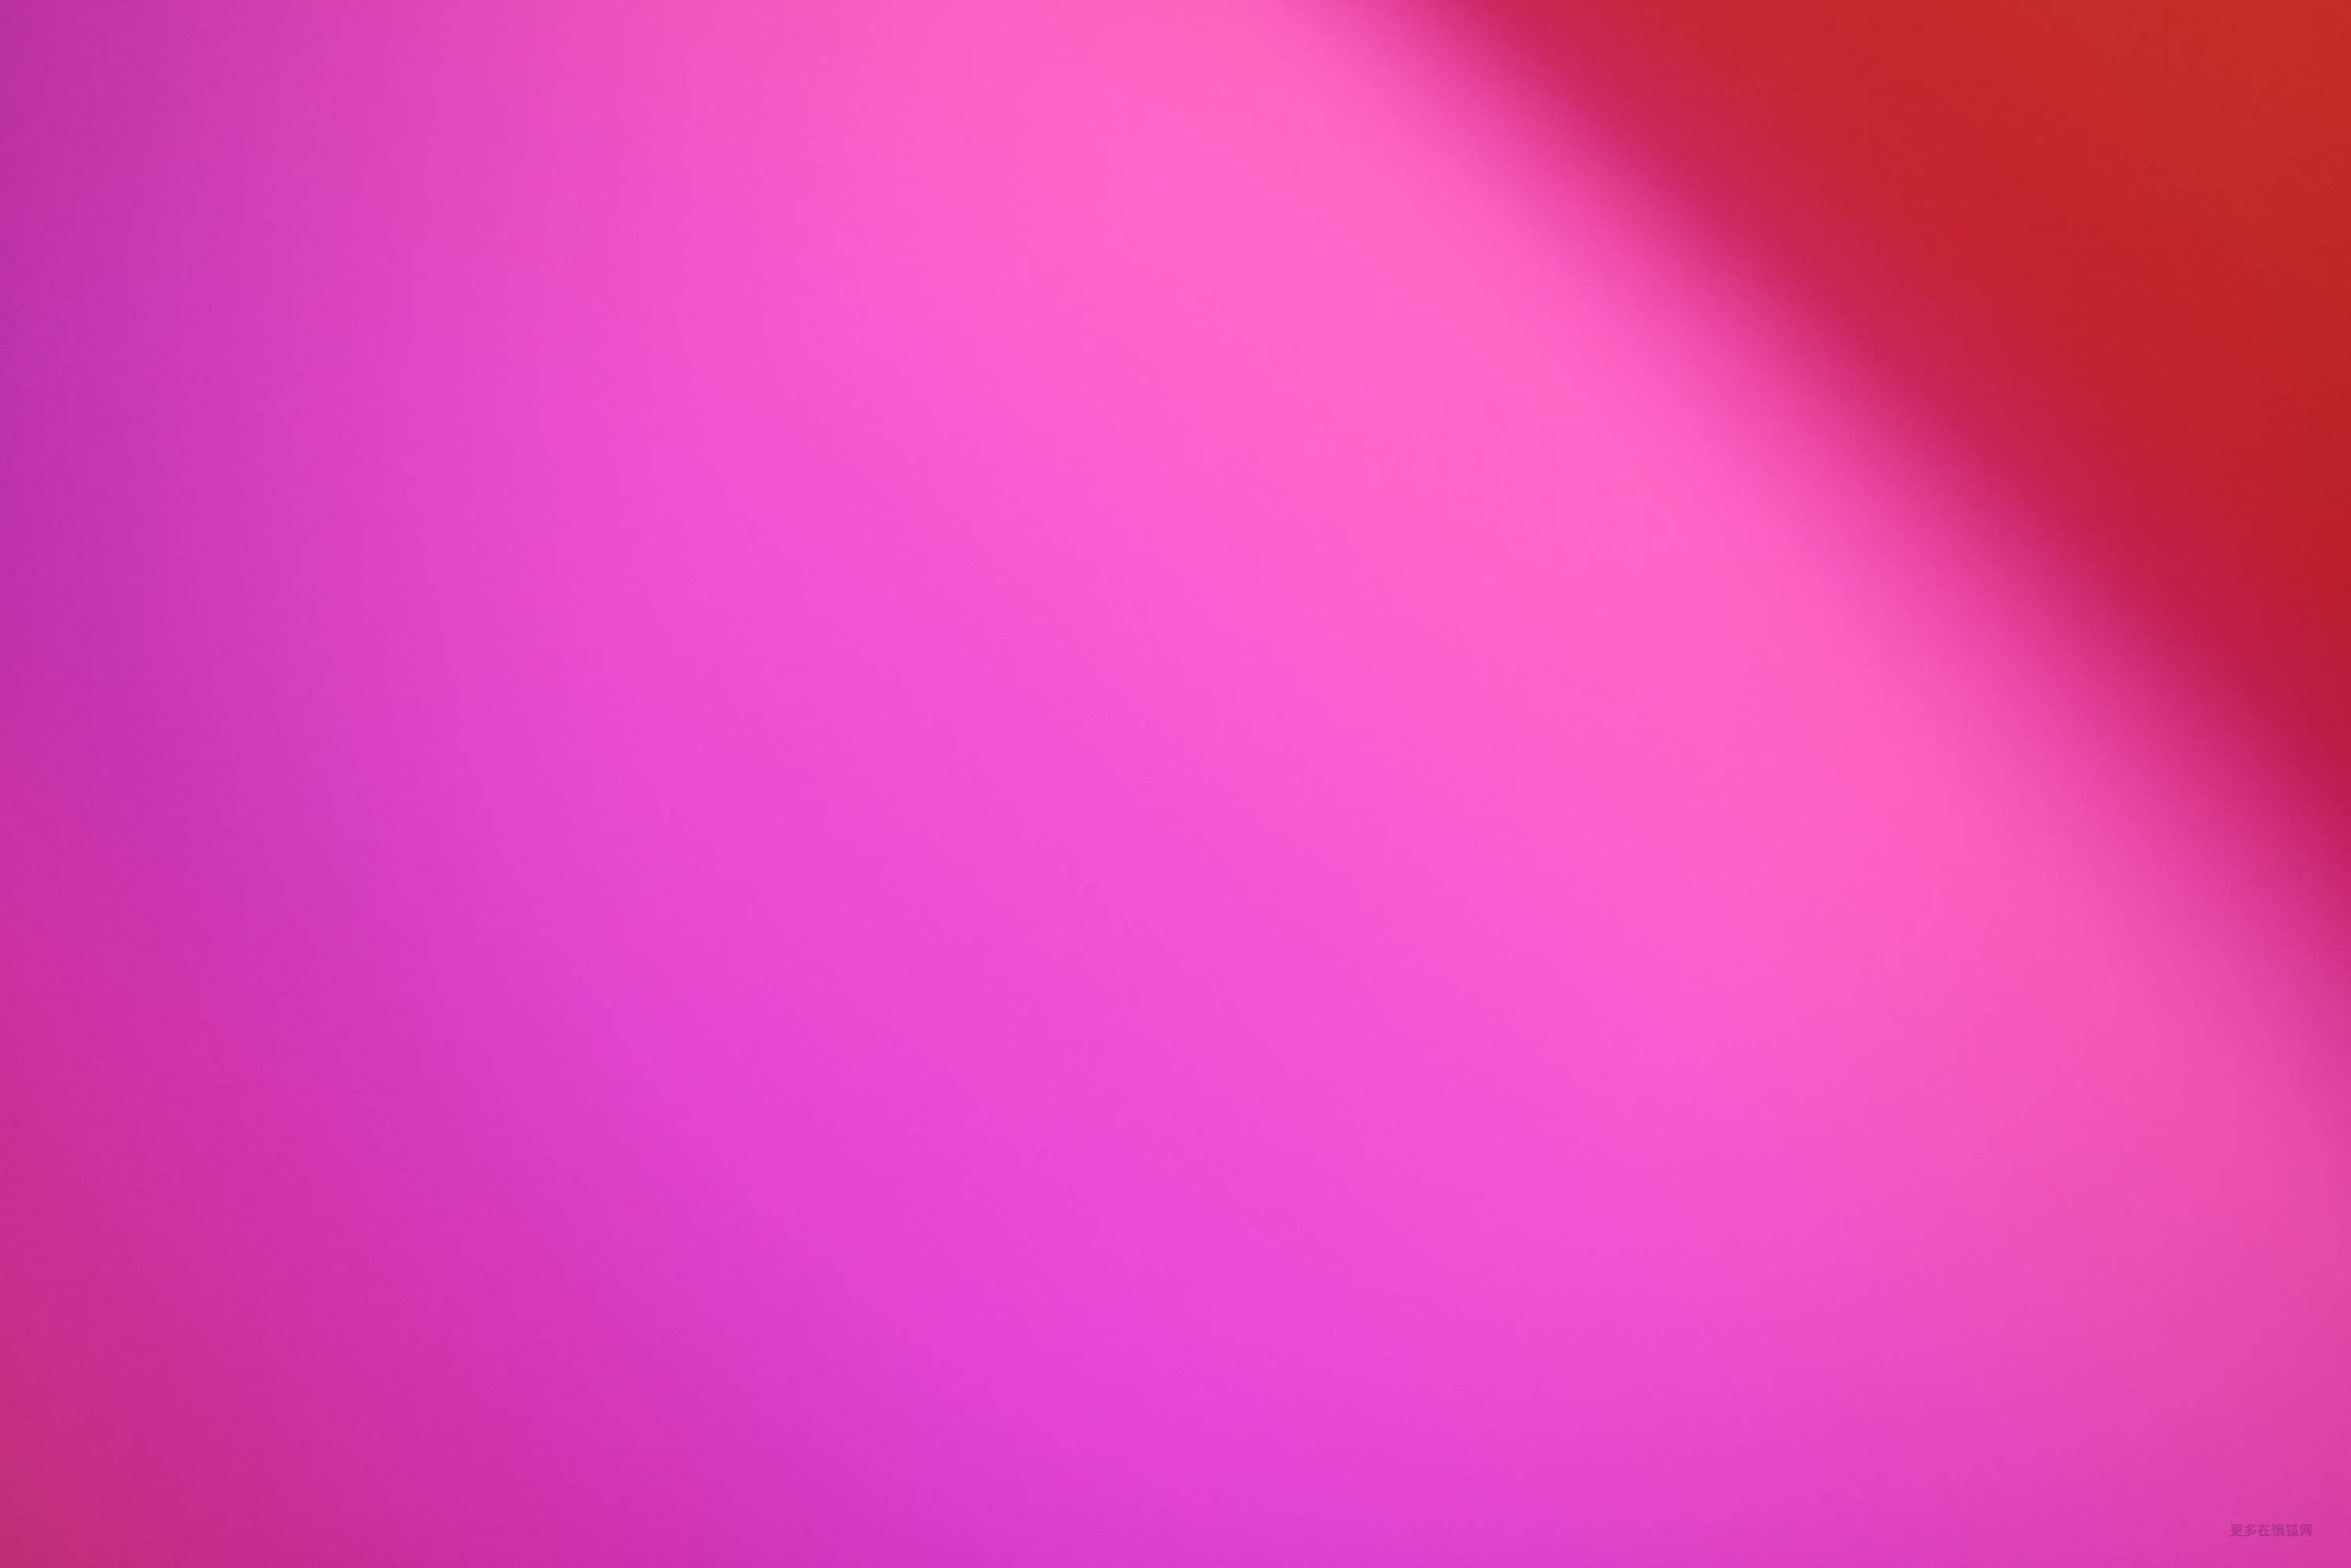 General 3001x2002 red background abstract pink 3D Abstract